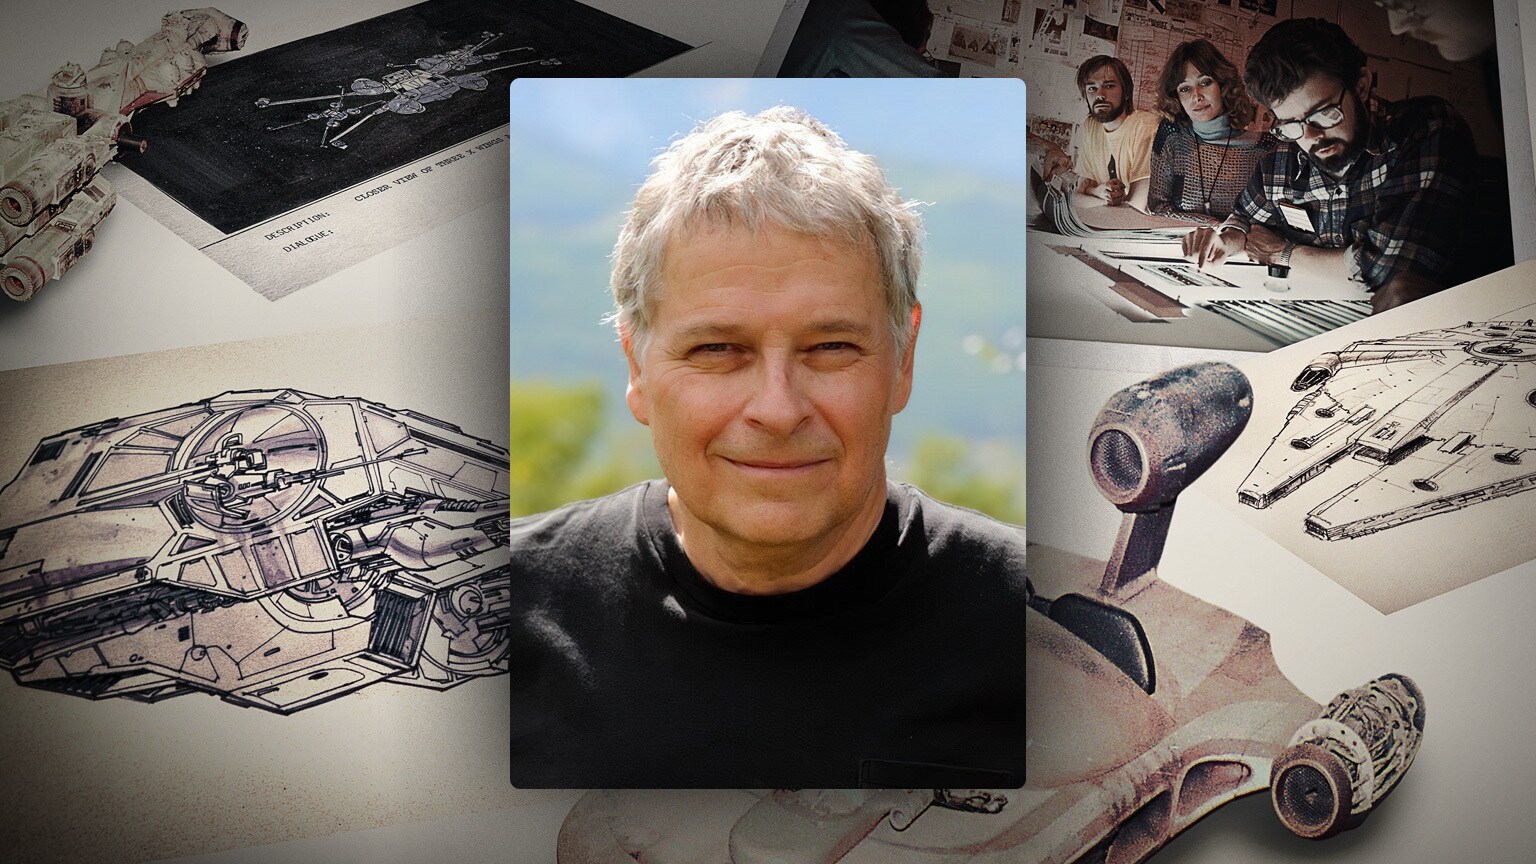 “There Was No Handbook”: Lawrence Kasdan on ILM and Crafting Light & Magic